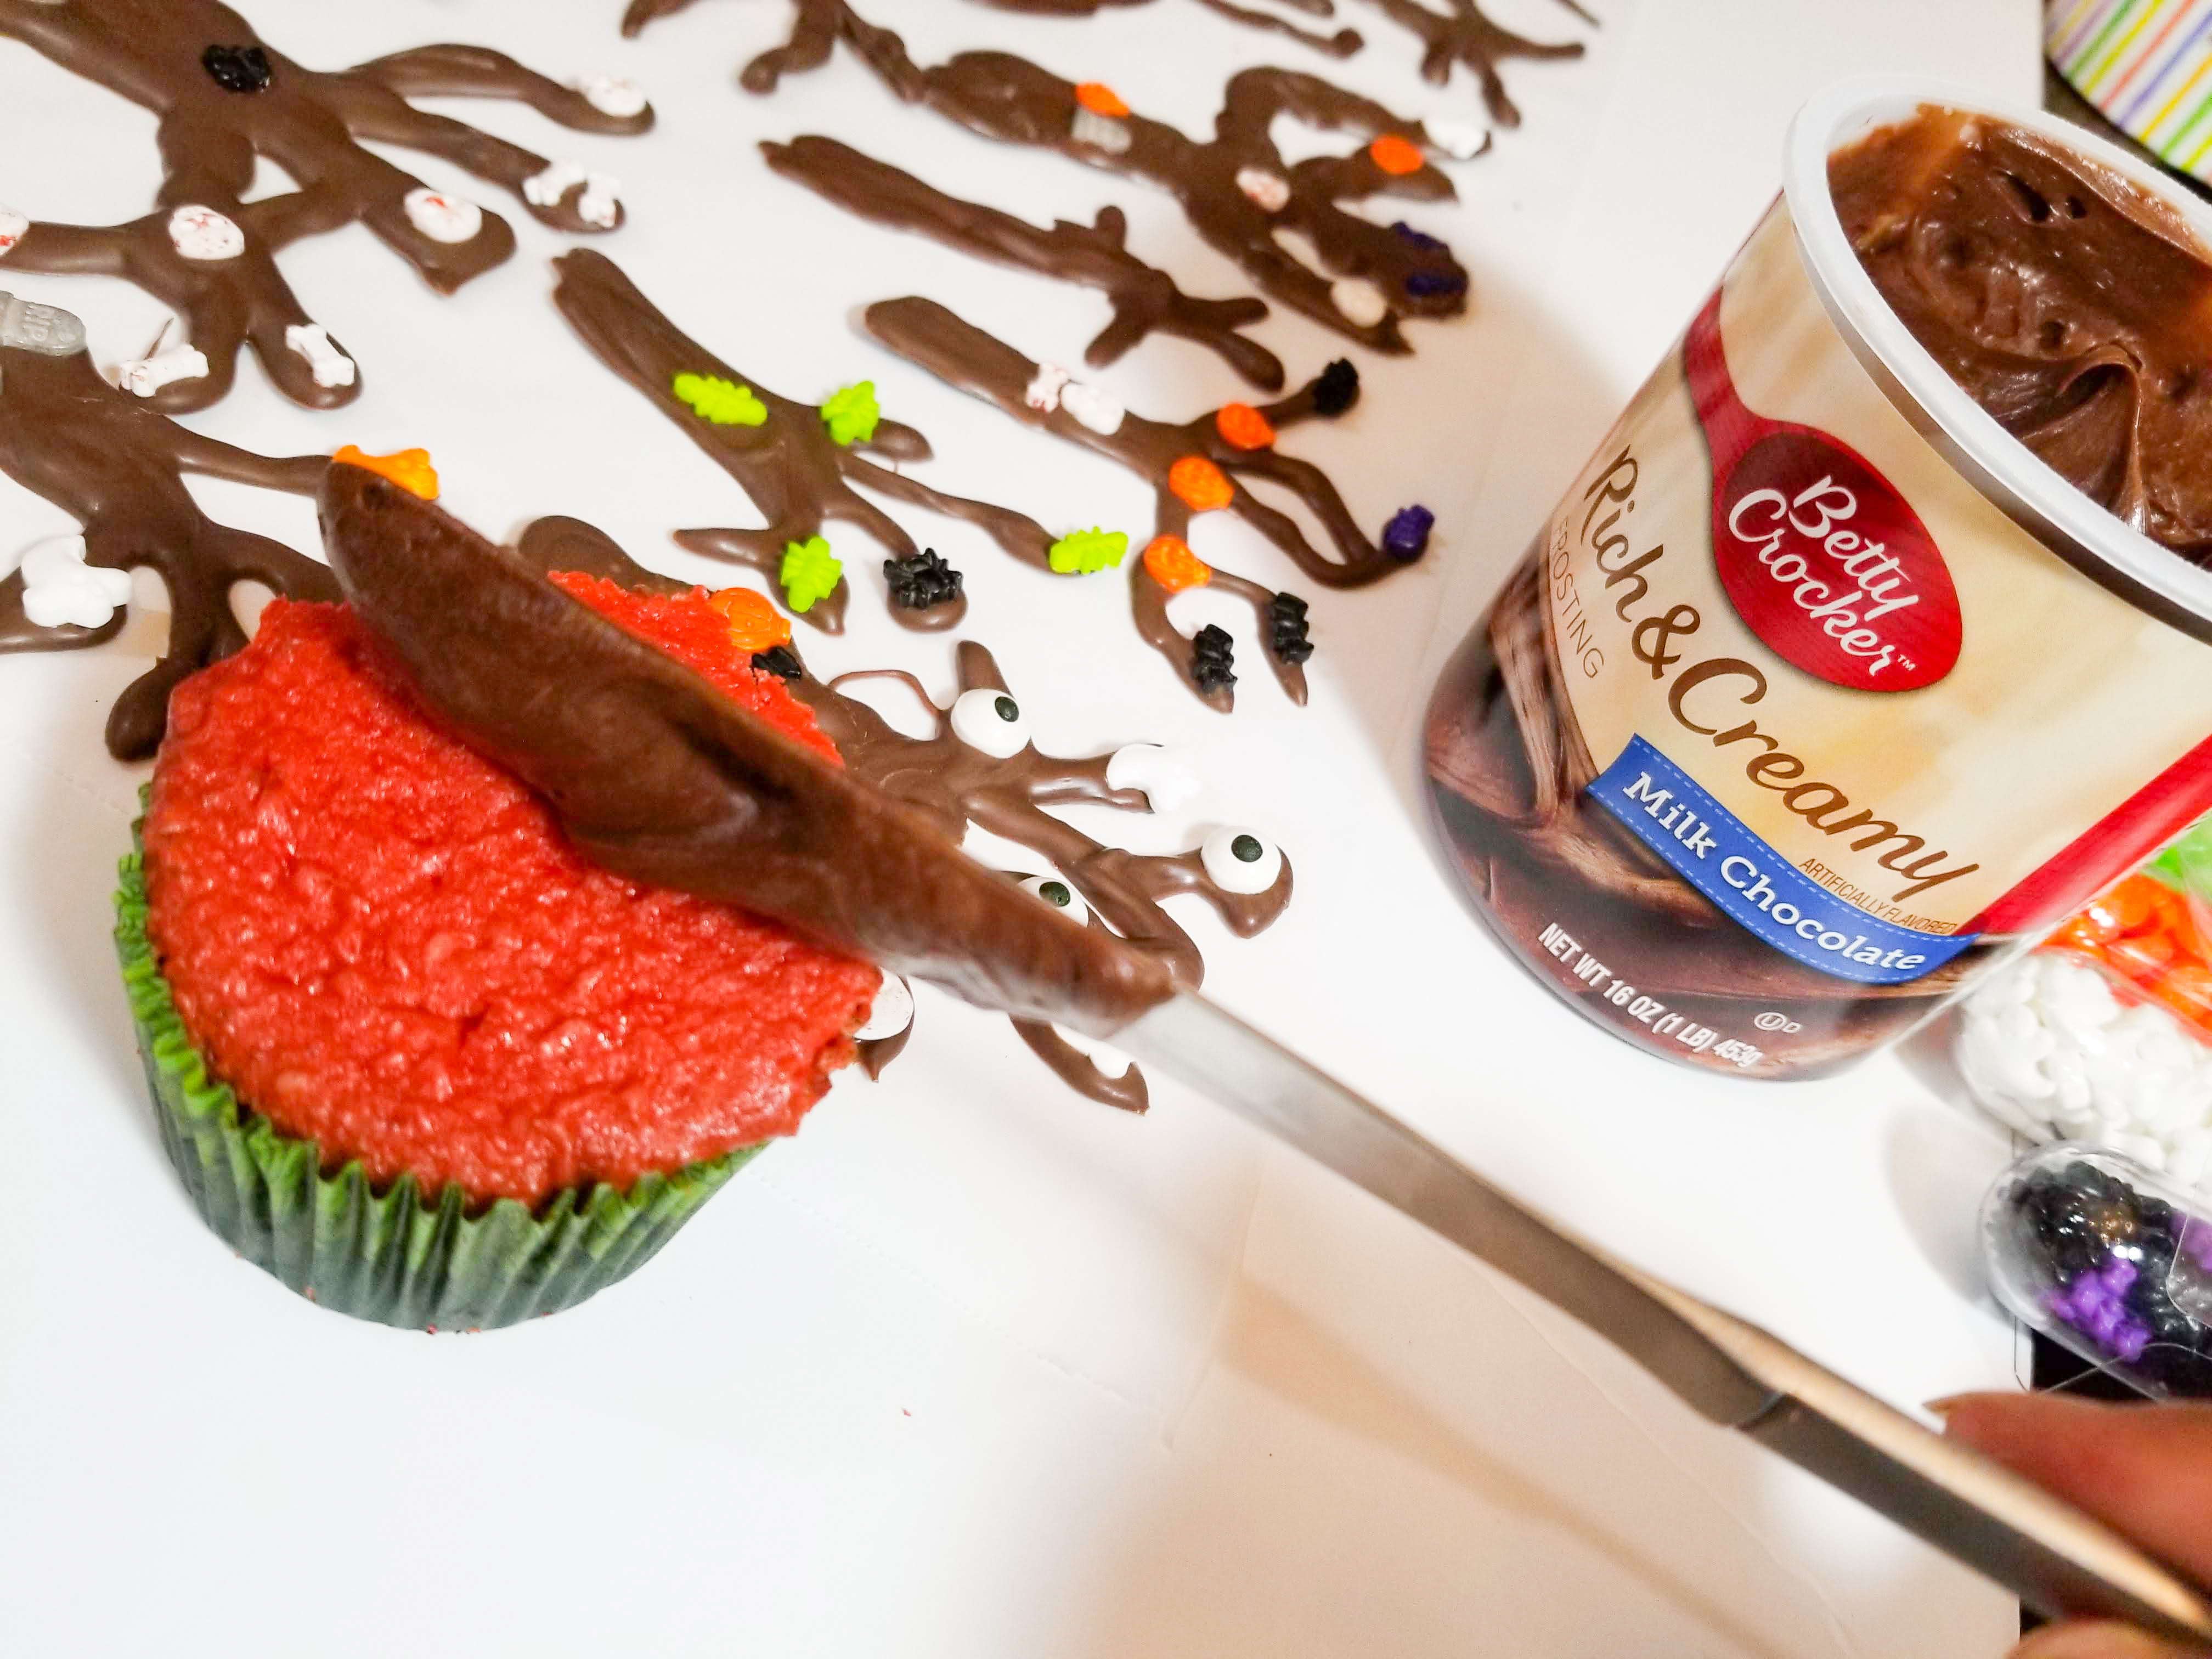 How to Make Delicious Creepy Tree Cupcakes. These cupcakes are the perfect blend between delicious and creepy. Chocolate trees are decorated and add an awesome look to the plain cupcakes. It's such a fun project to make with everyone!